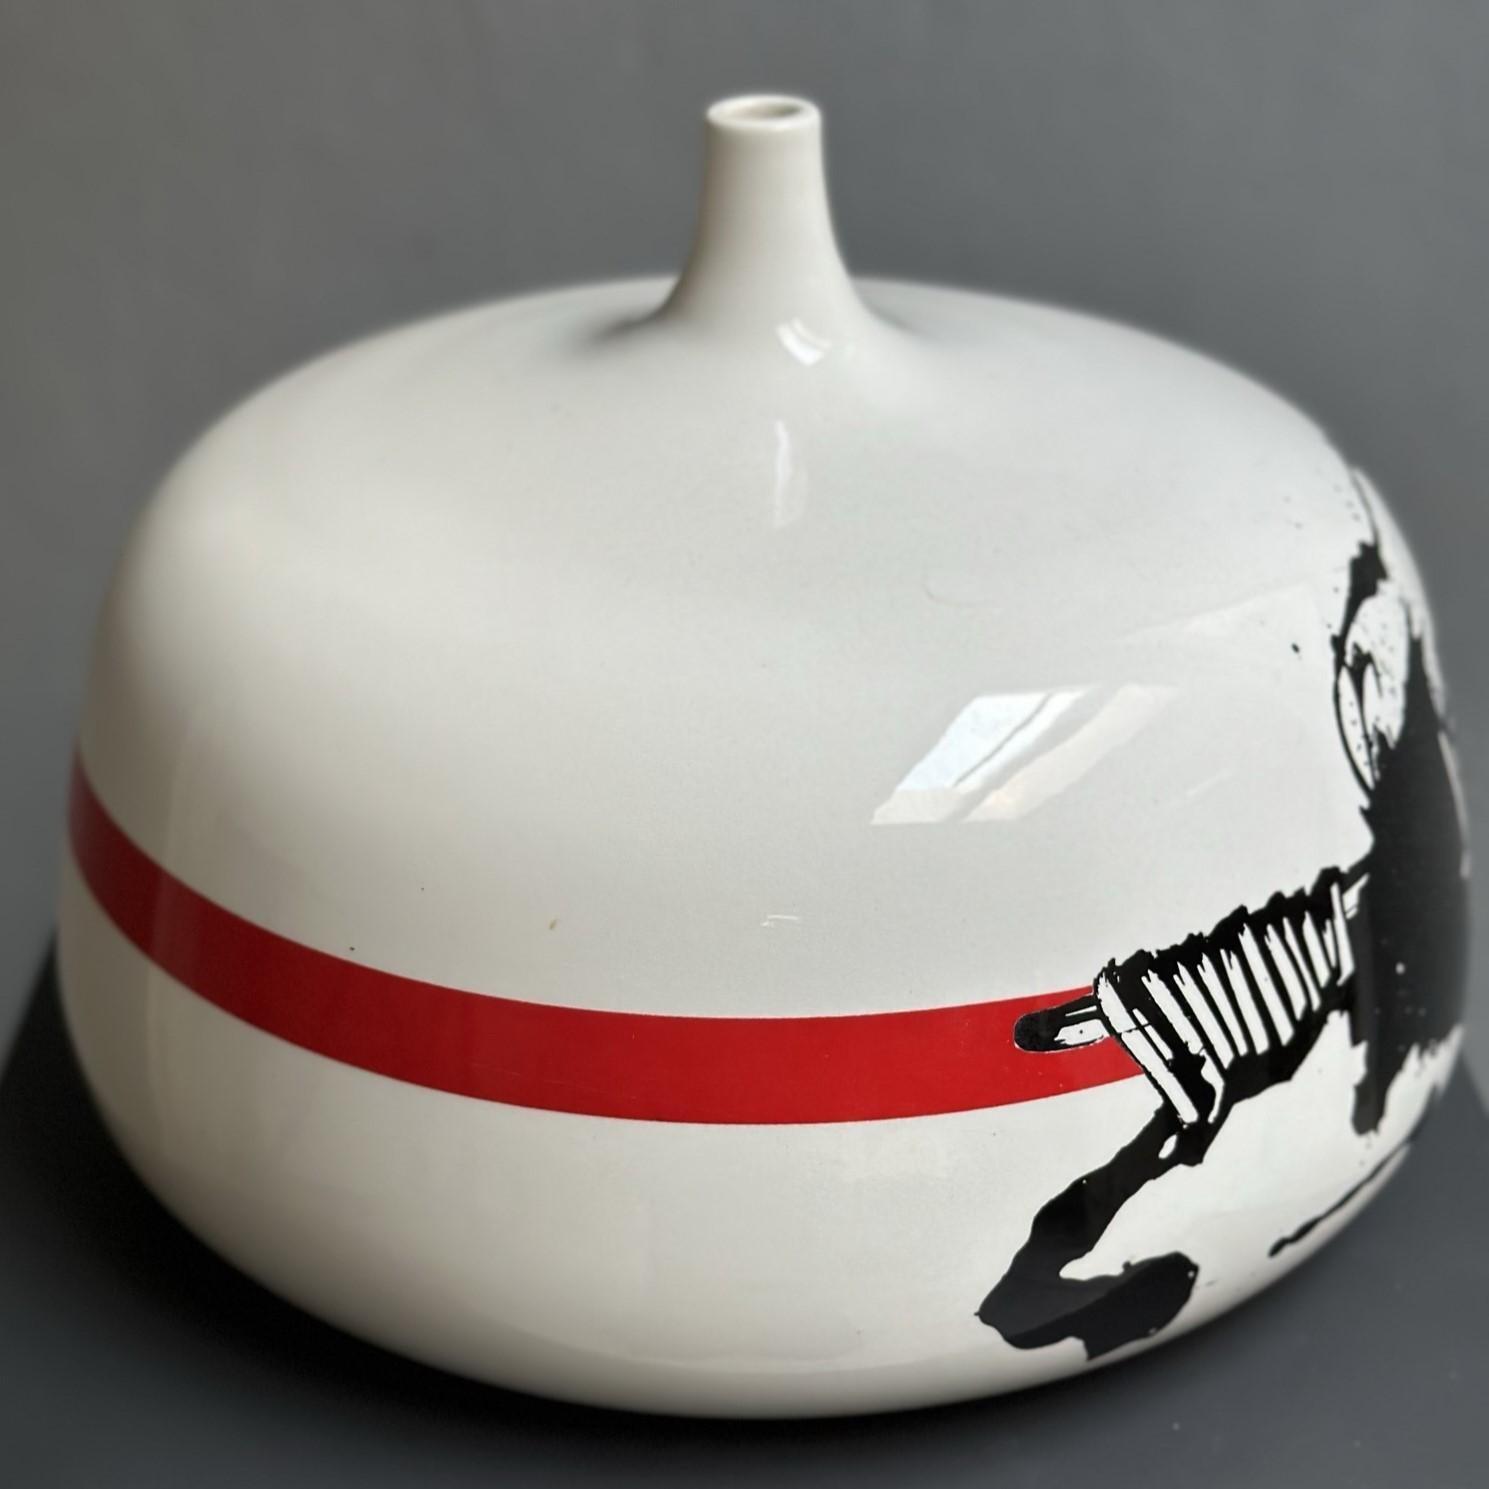 Ceramic vase by Emilio Scanavino n.21/50 1972 exclusively for Motta  In Good Condition For Sale In Milan, IT